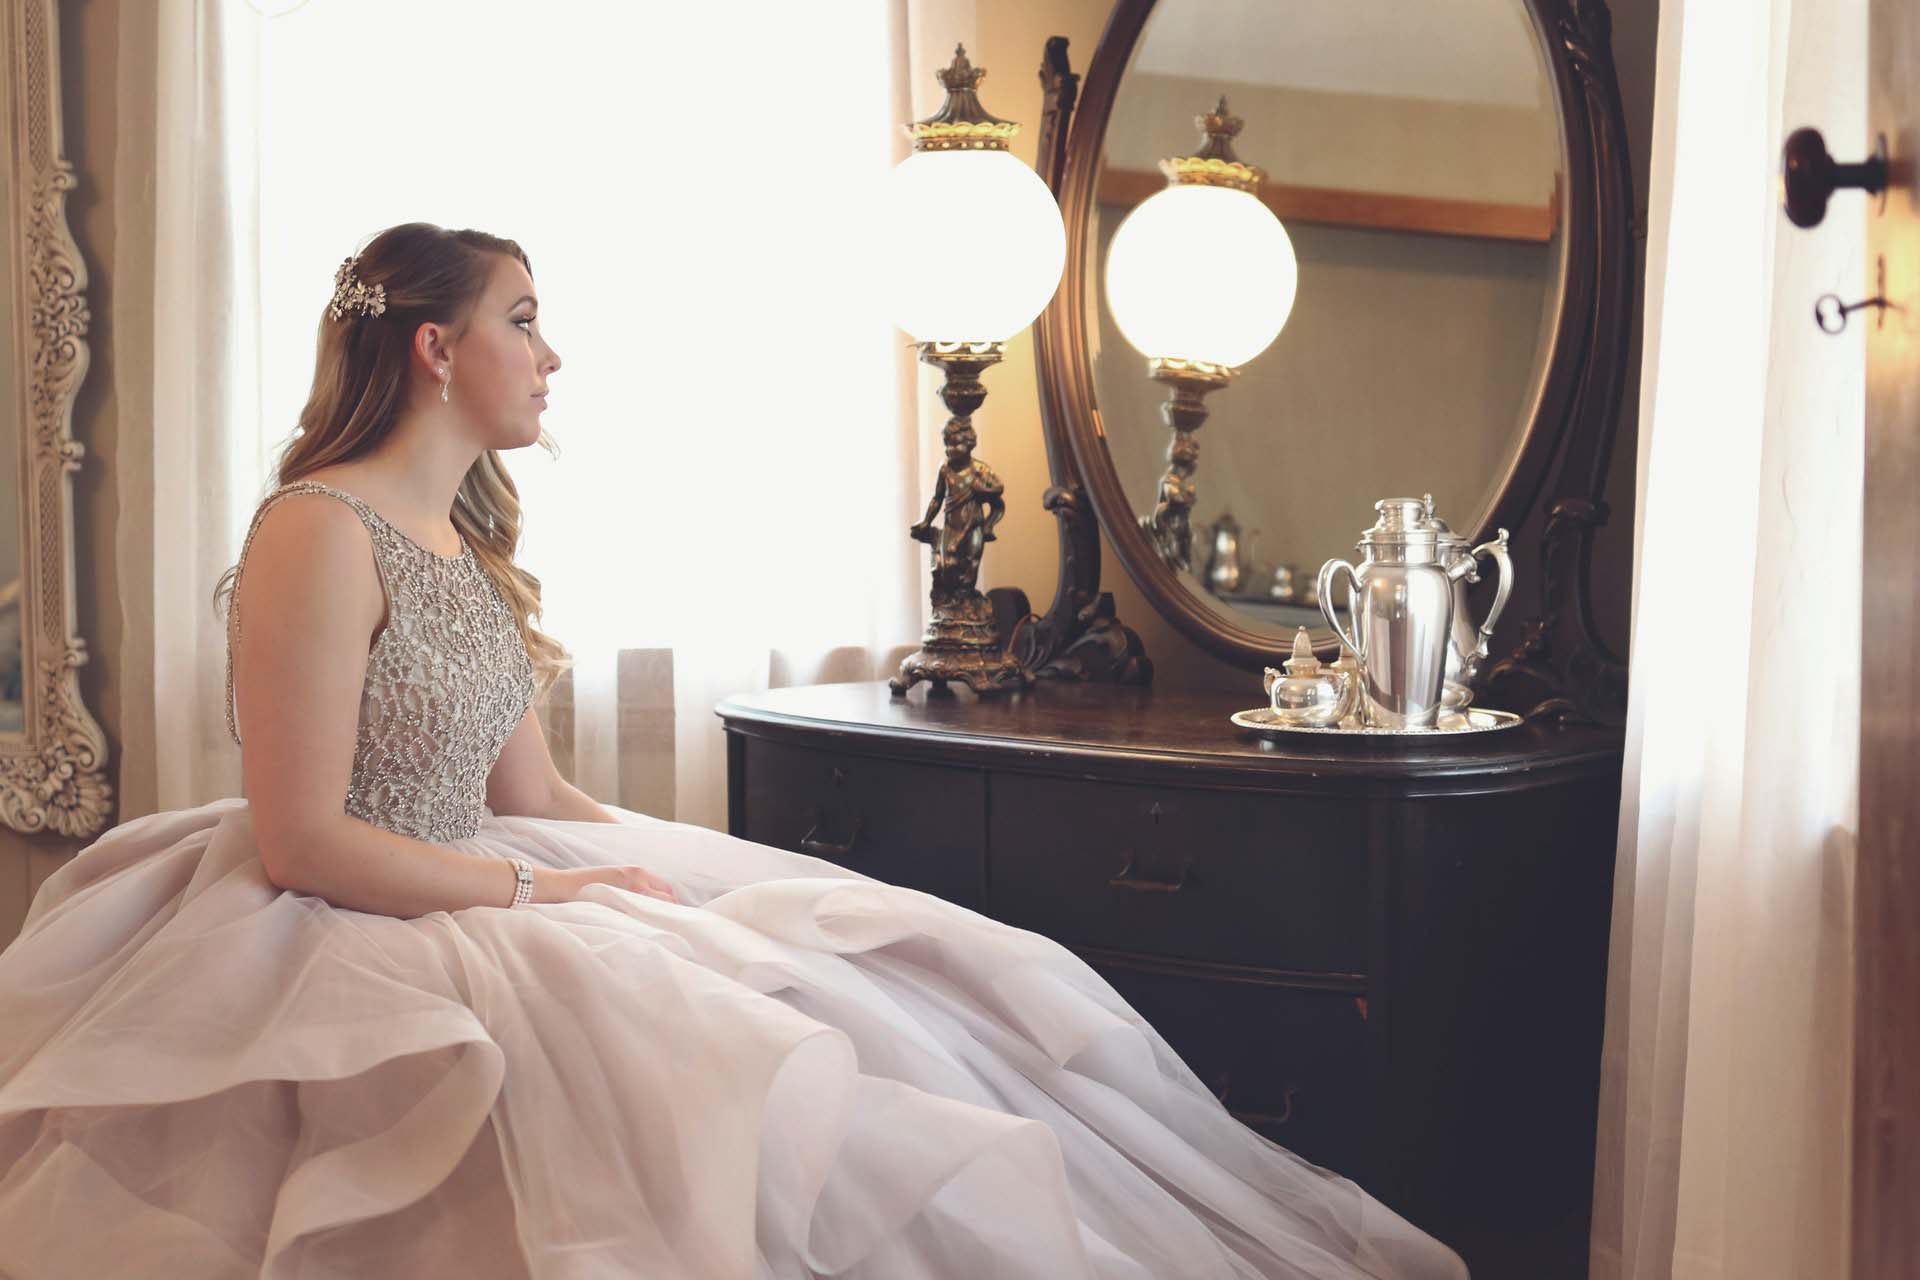 How To Look Thinner In a Wedding Dress